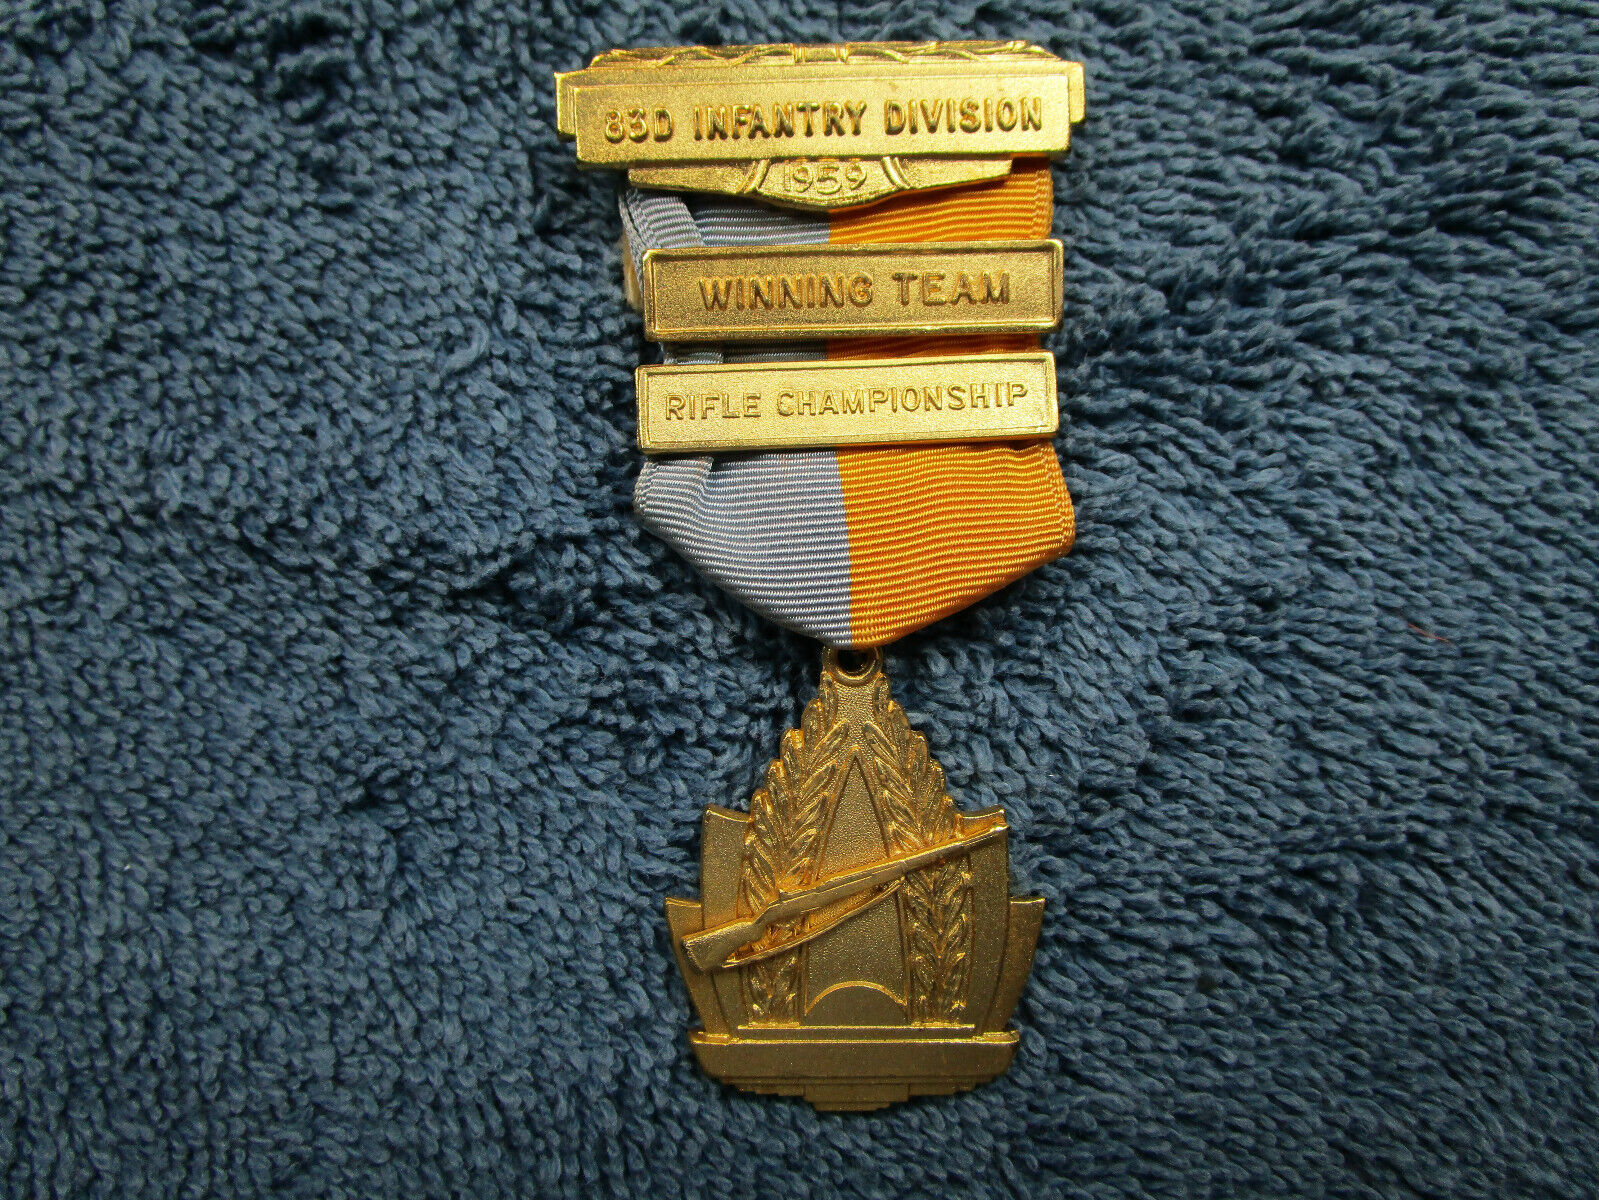 83D Infantry Division Winning Team Champion 1959 Army Rifle Medal Award 160-31EE